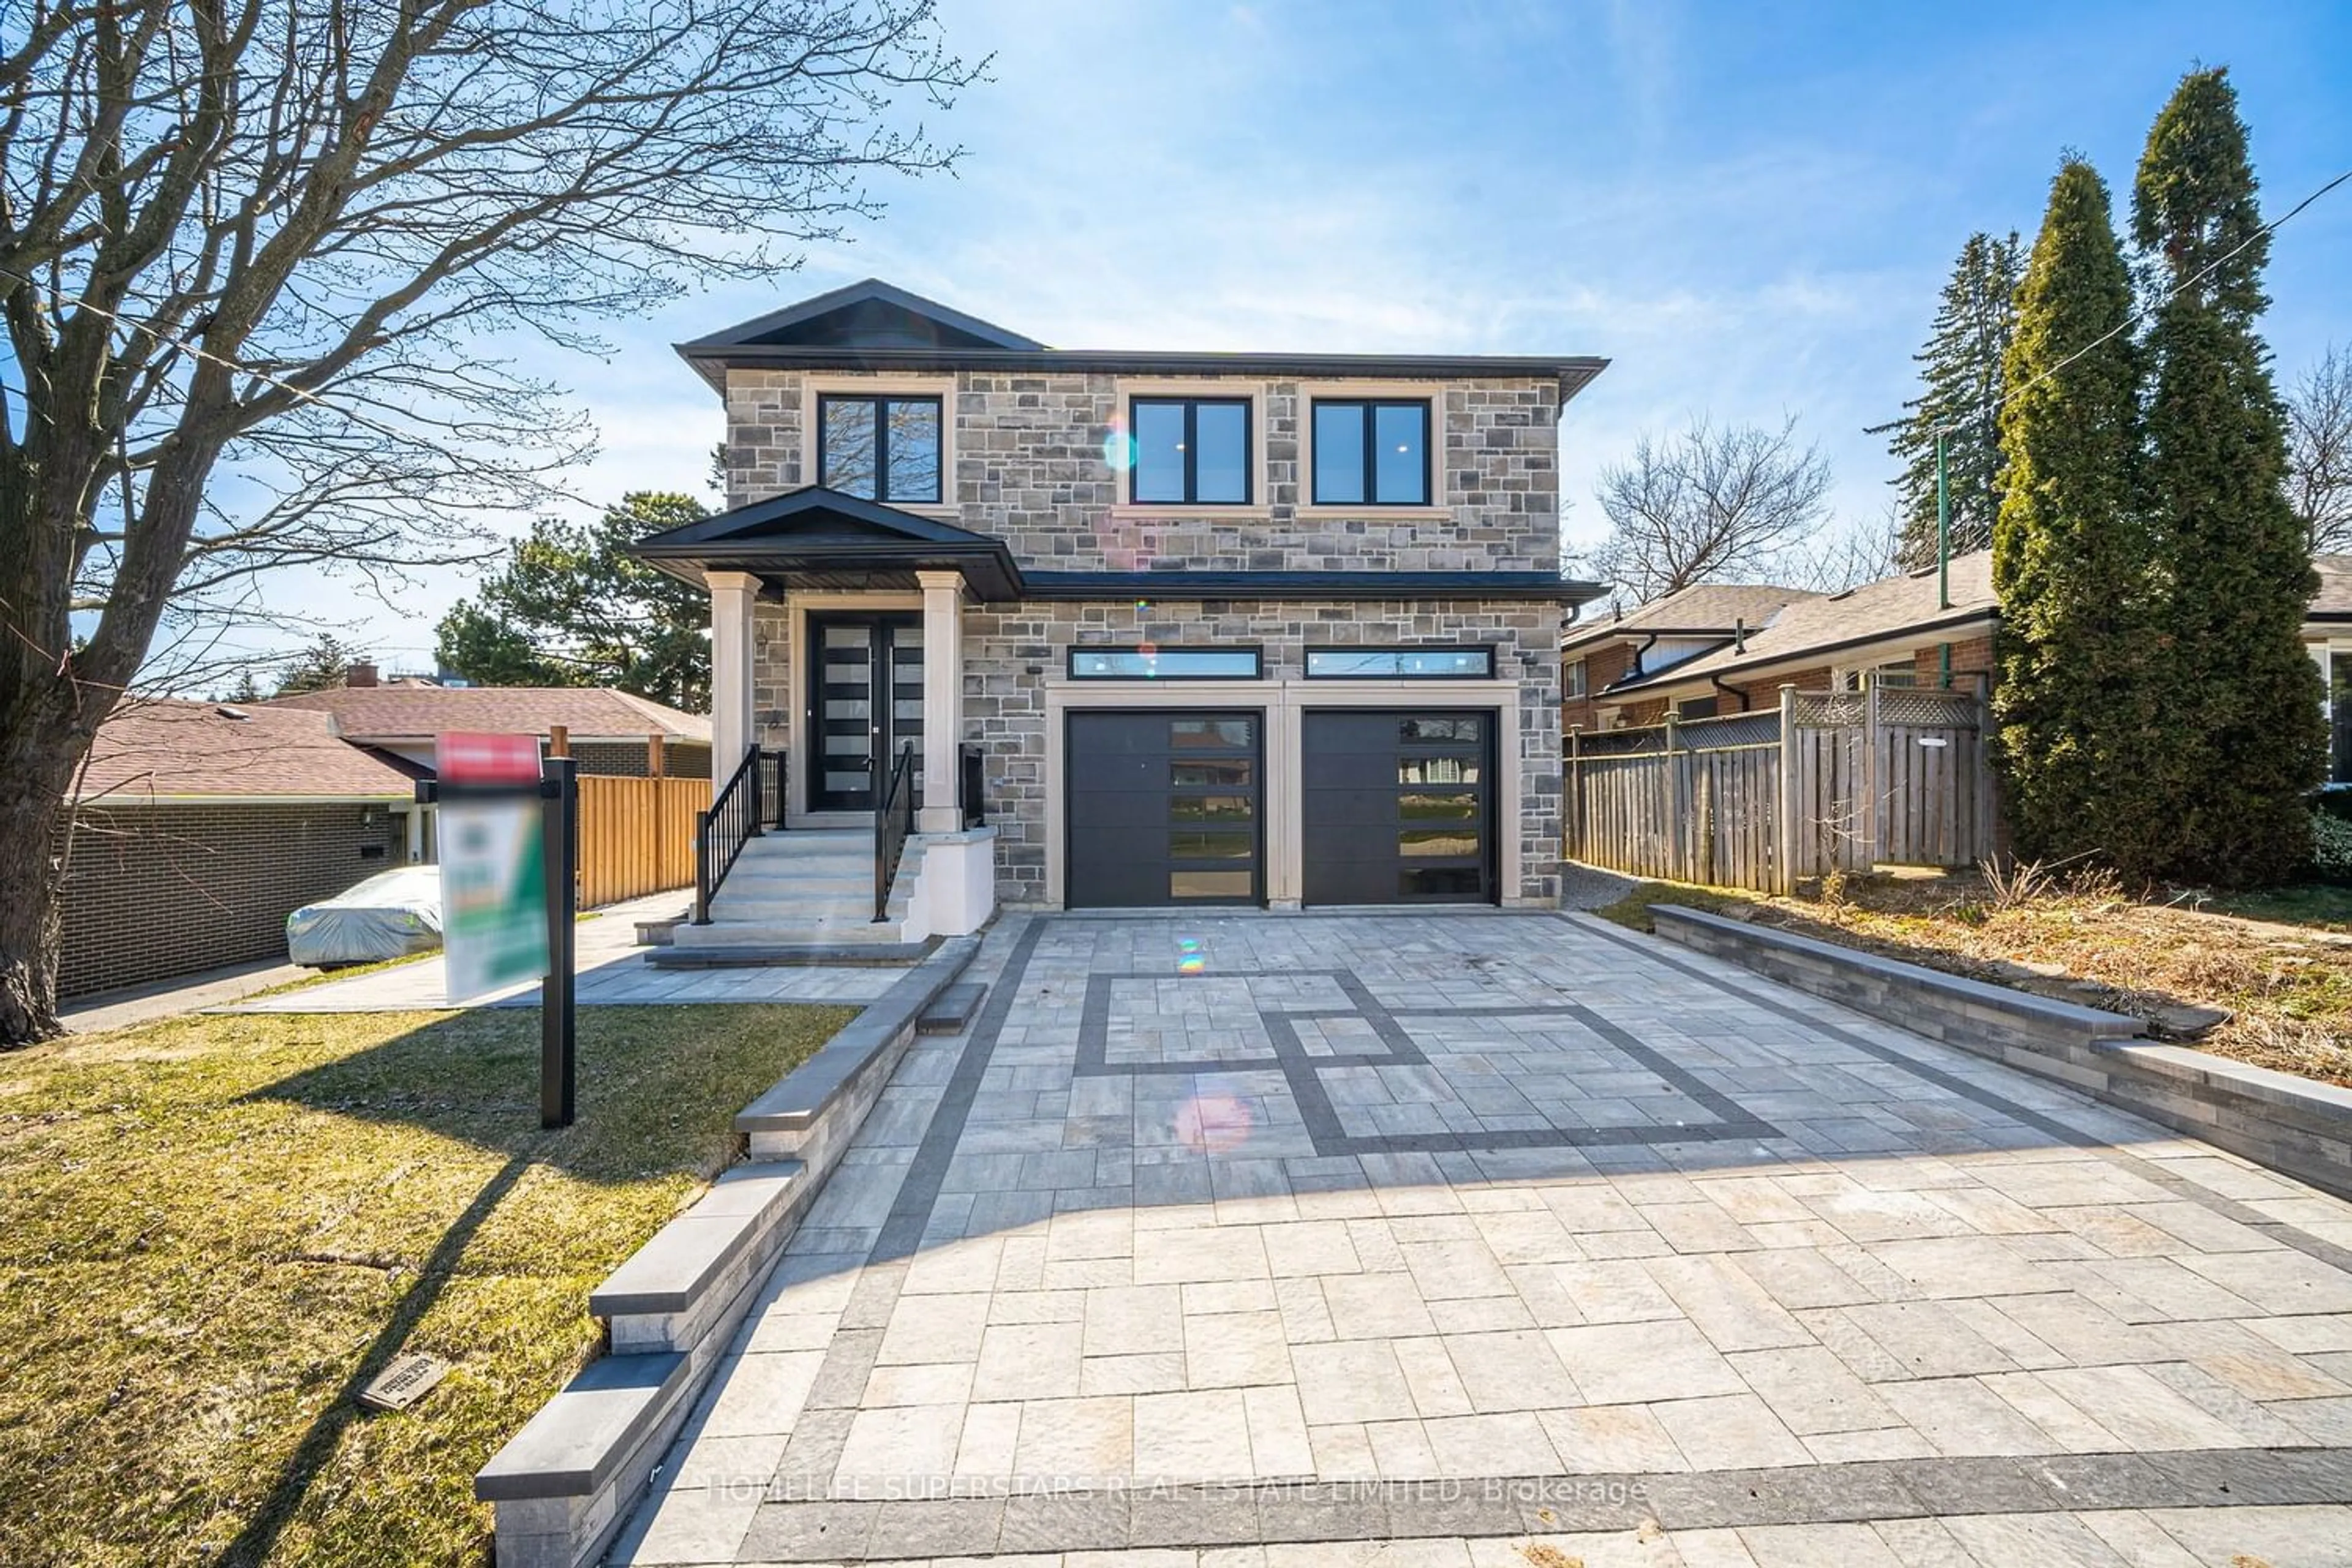 Home with brick exterior material for 49 Greendowns Dr, Toronto Ontario M1M 2G6